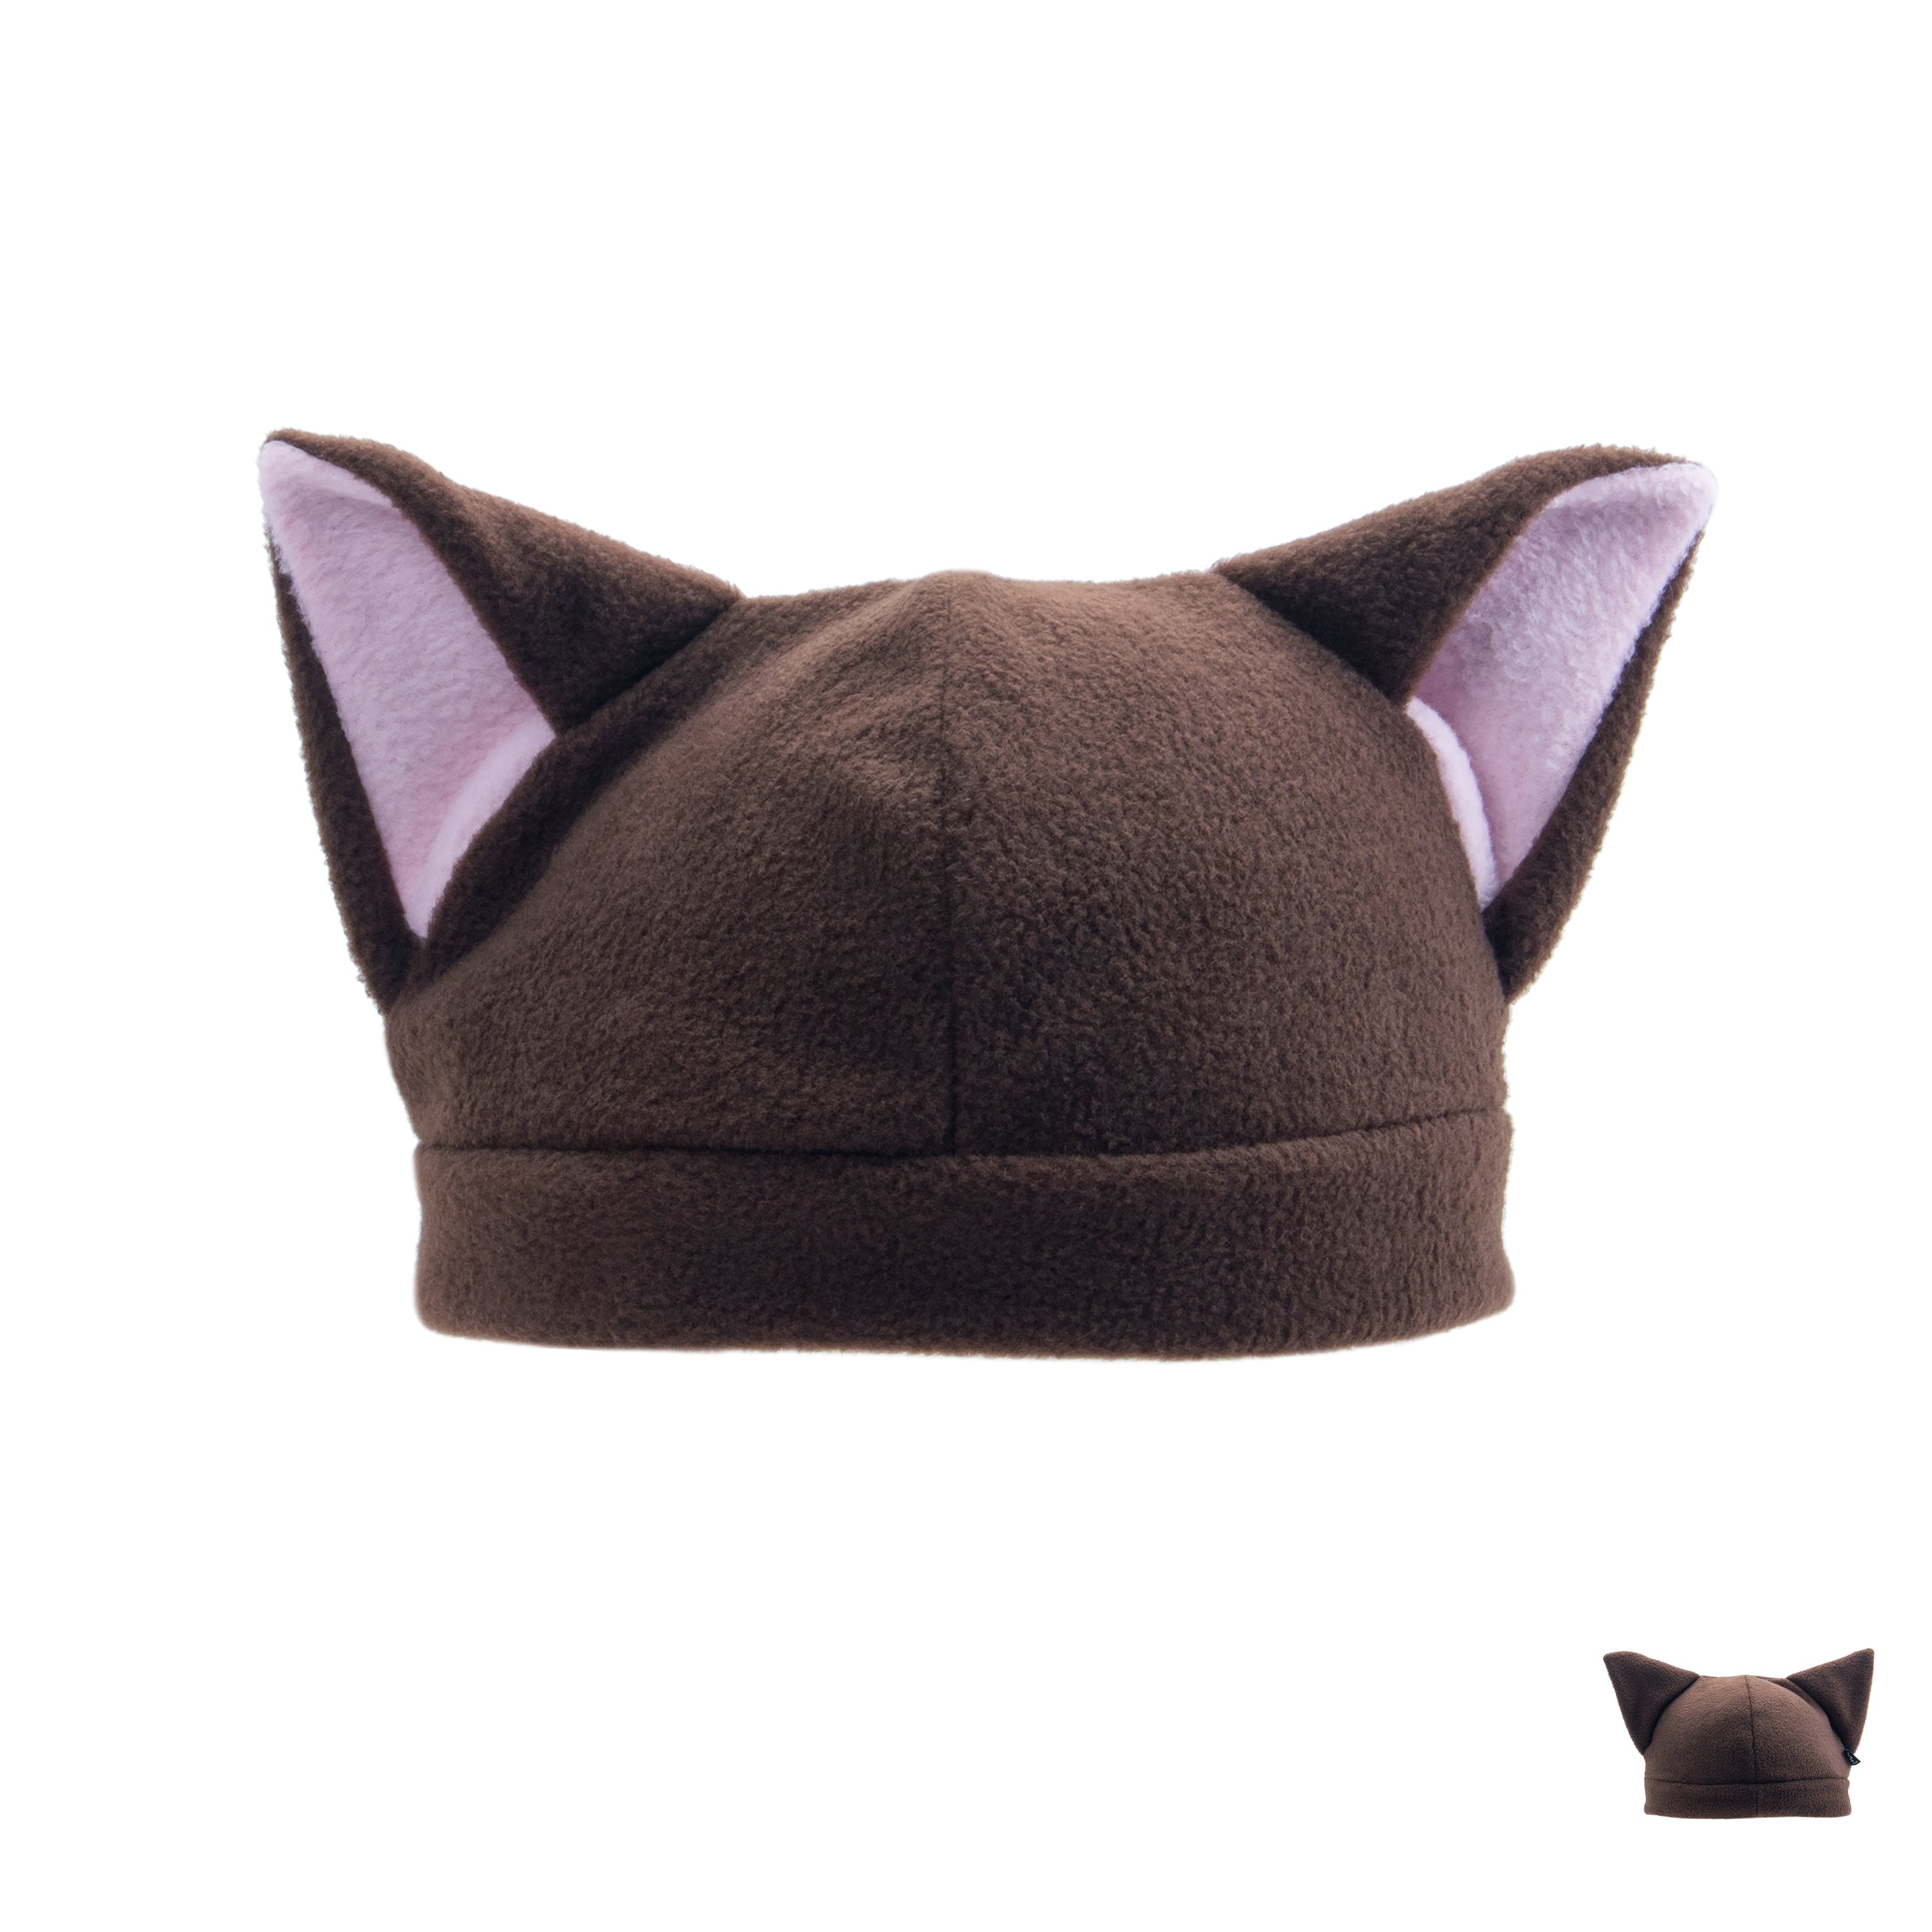 Pawstar Fleece Kitty Hat partial fursuit, Halloween costume, cosplay, and furry